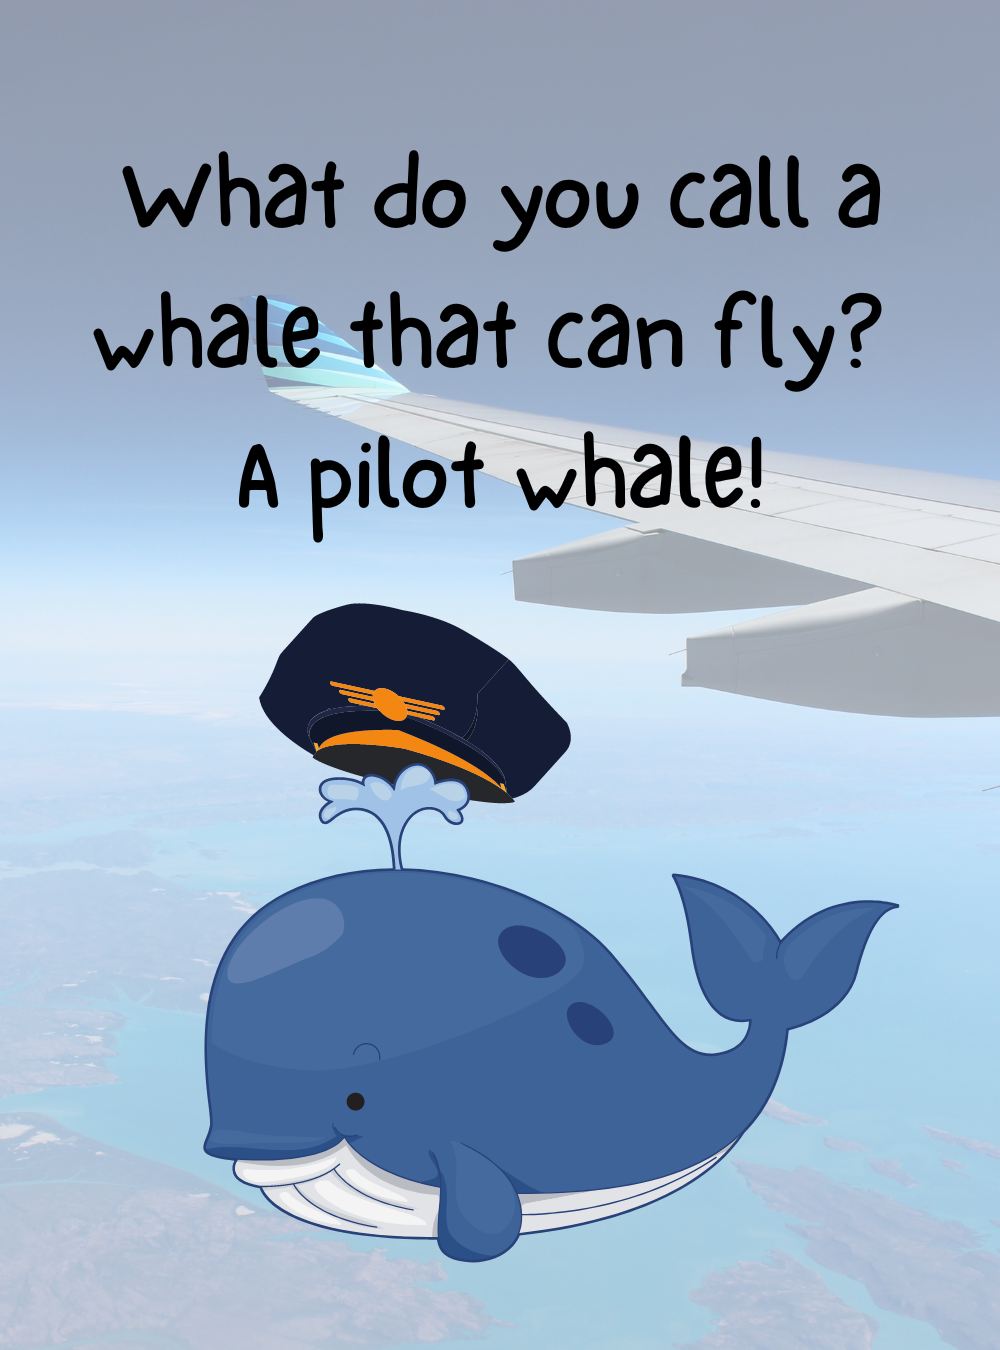 100 Funny Whale Puns And Jokes To Tail Your Friends - Glory of the Snow